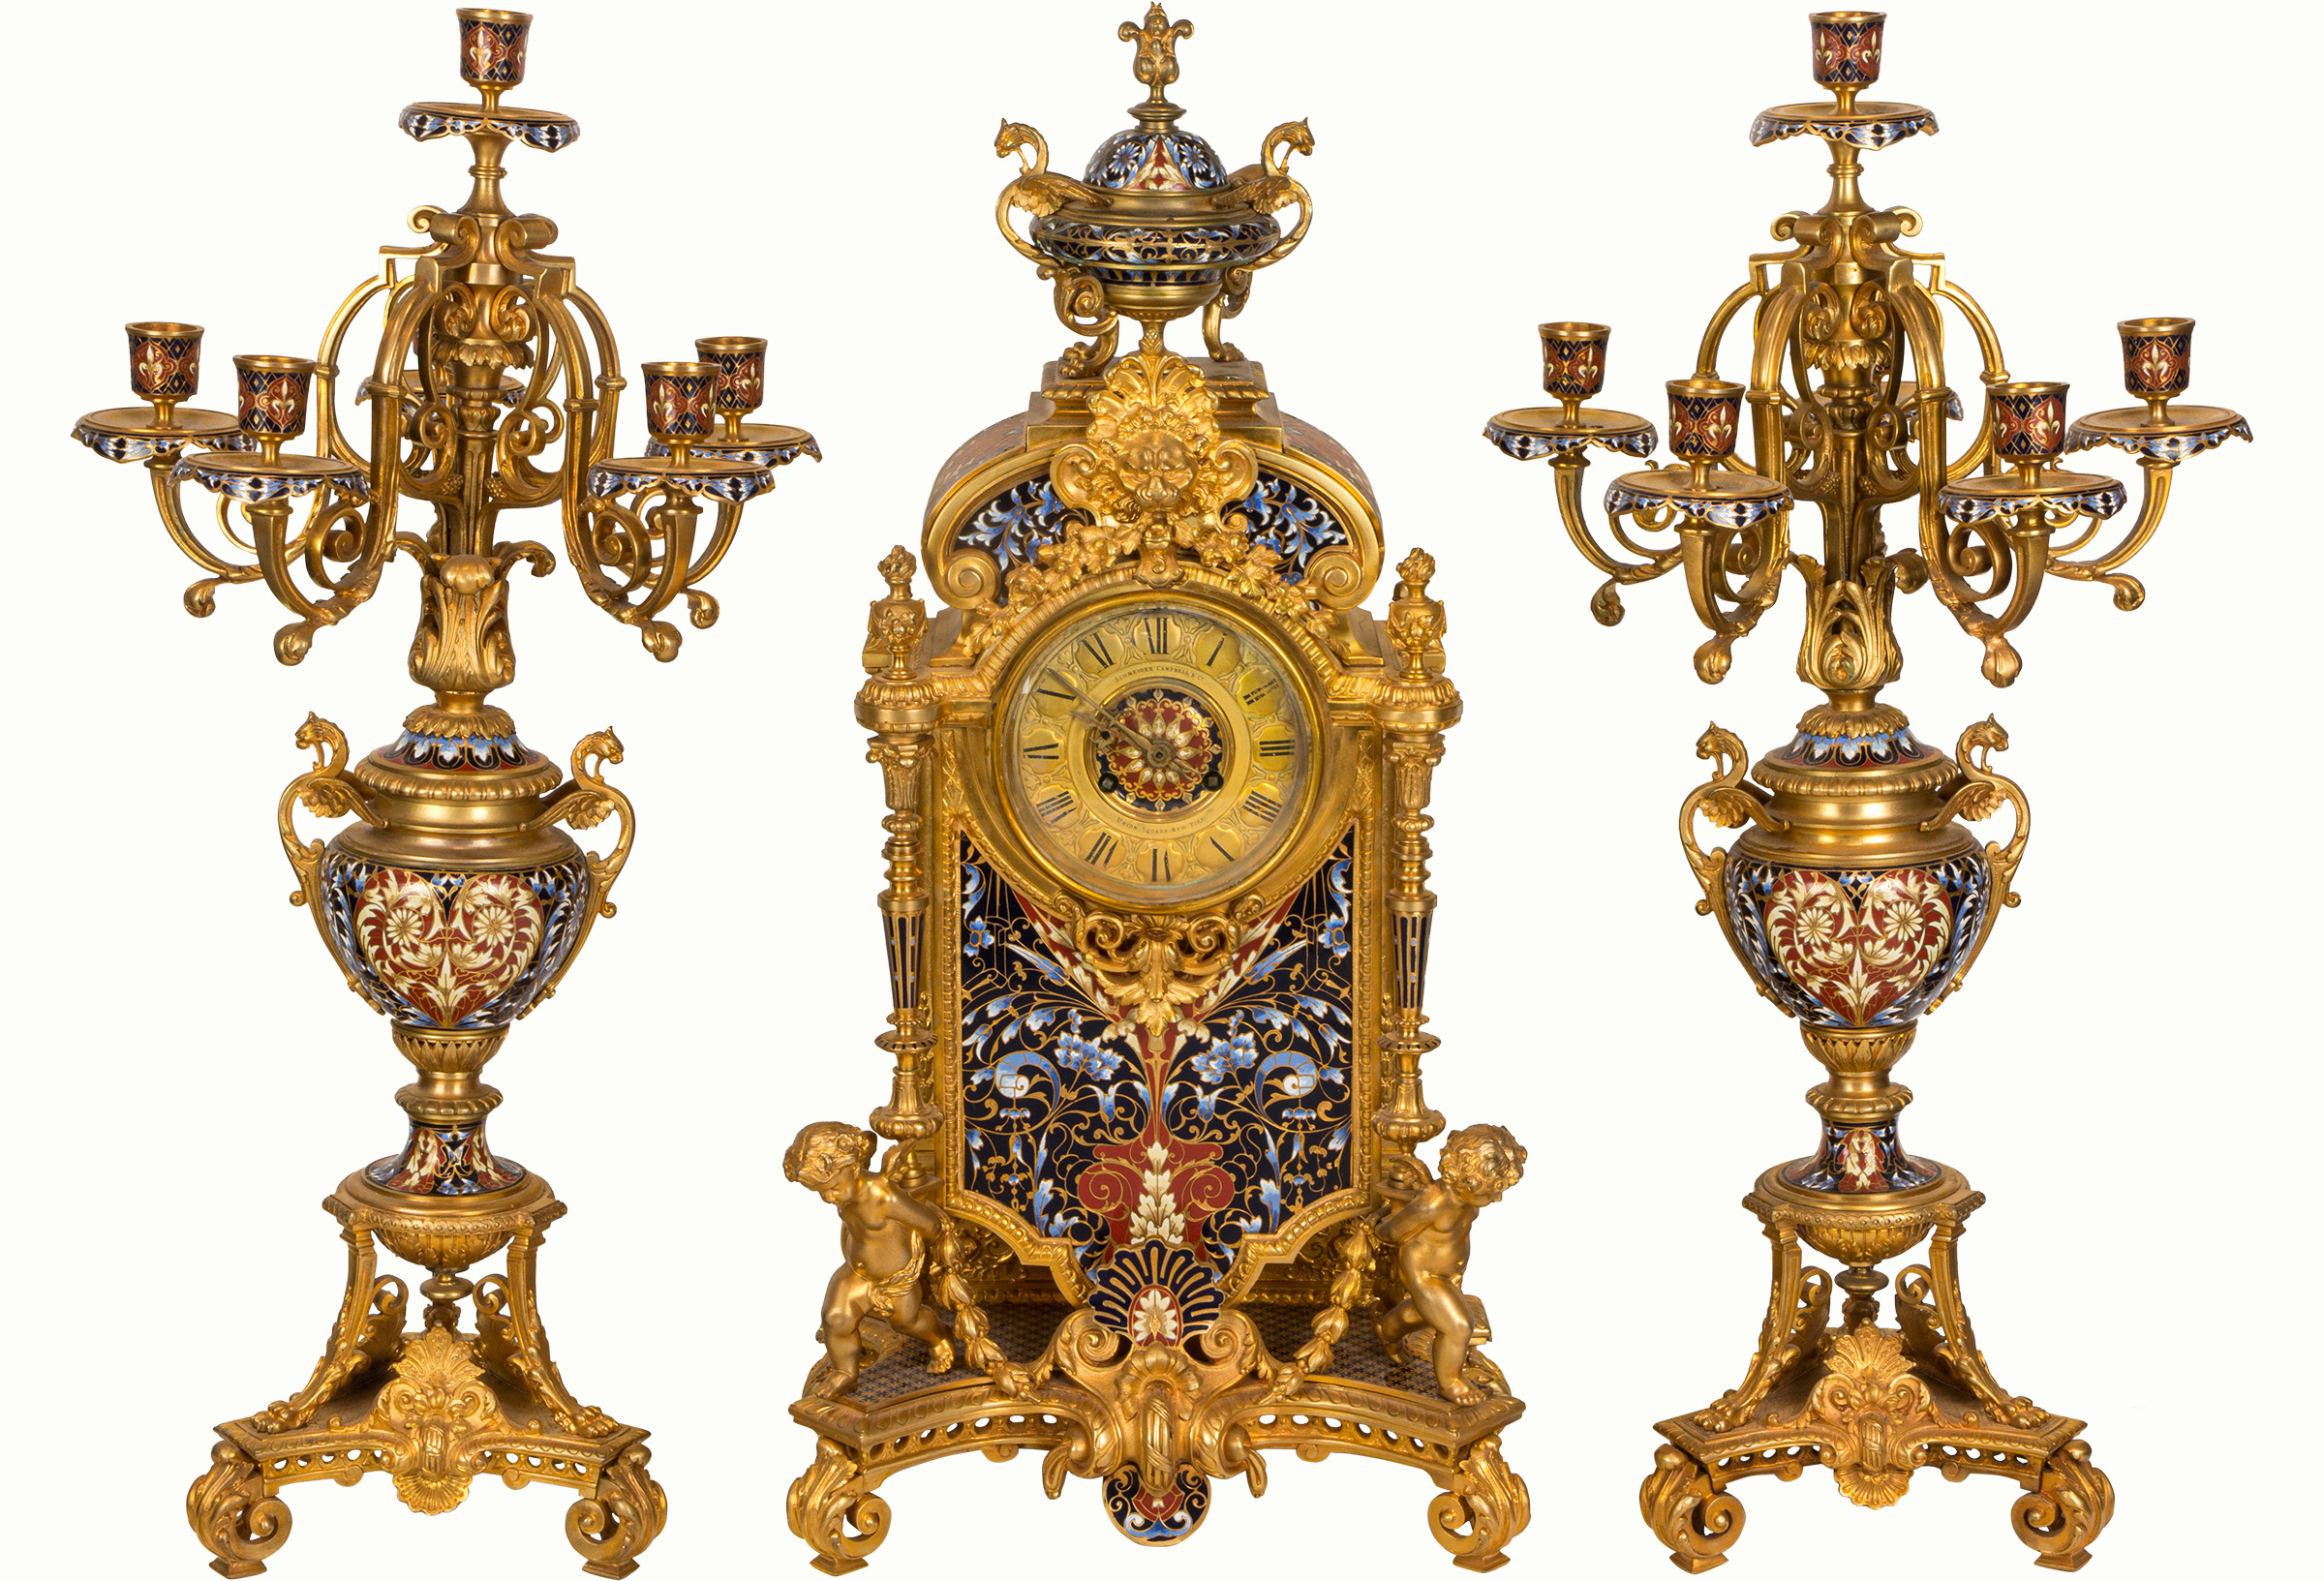 A fine French champlevé enamel and gilt bronze clock garniture, retailed by Schneider, Campbell & Co, Union Square, New York.